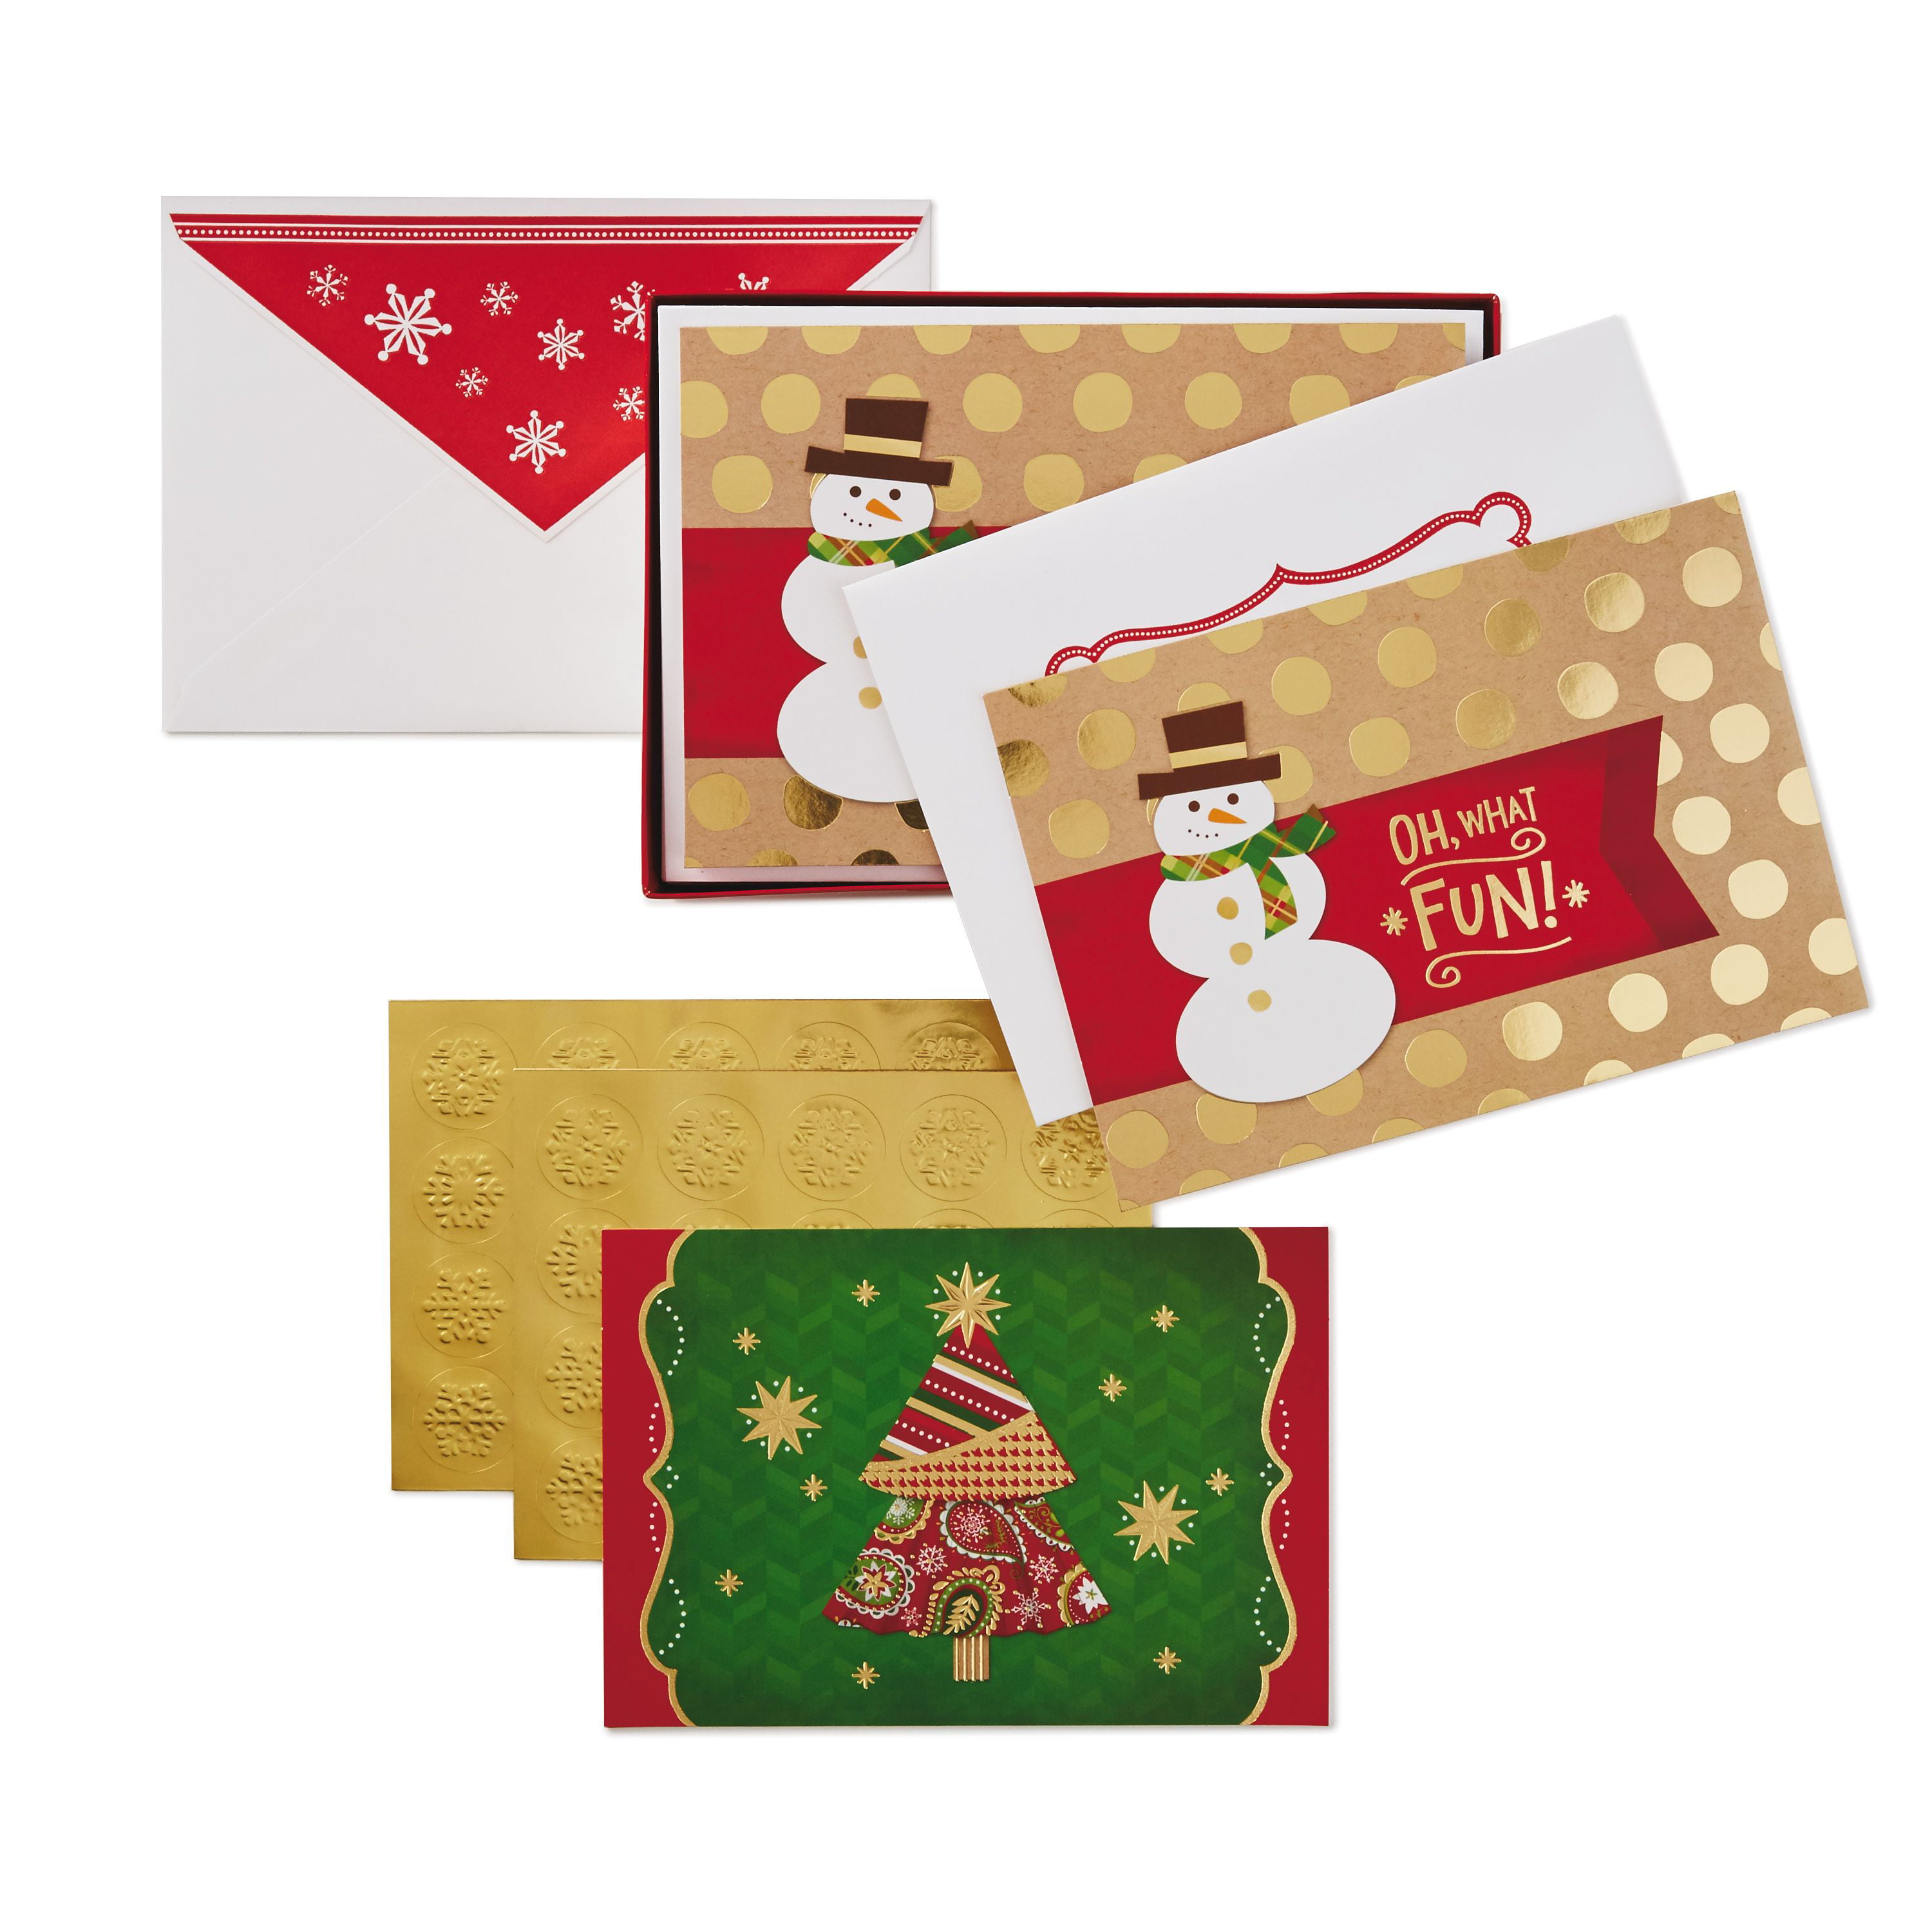 10 Cards in 2 Photographic Designs Festive Foliage Boxed Charity Christmas Cards from Hallmark